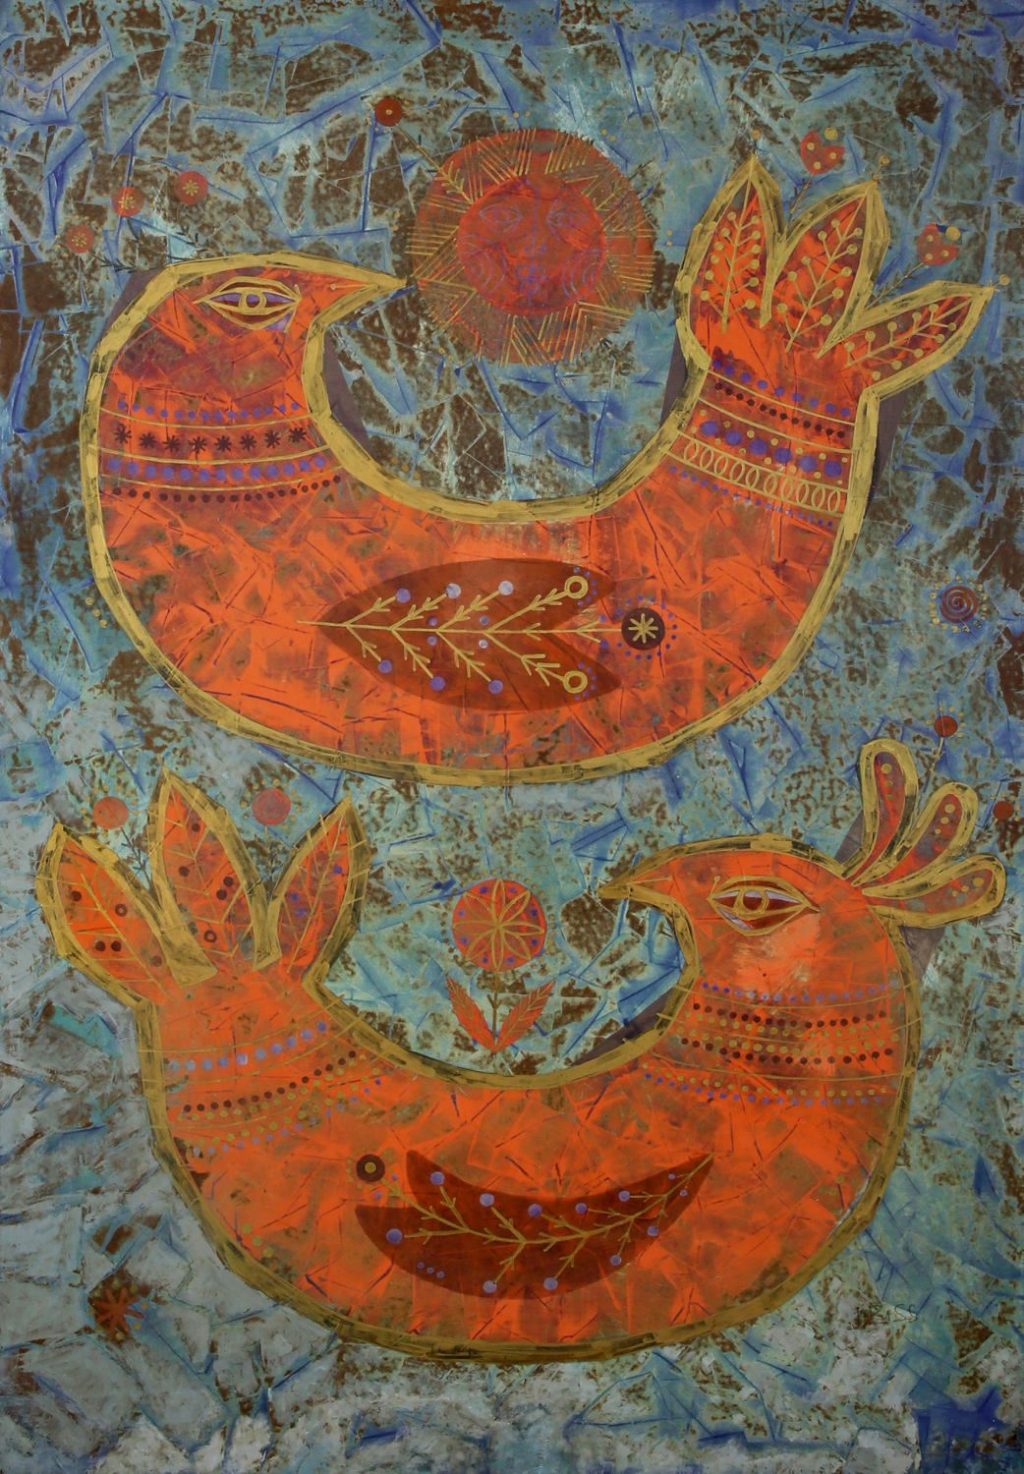 Art time gallery Jerusalem(Art online) -  Samy Briss - Doves in Love - Original Acrylic on Wood - 80X120 cm / 32X48 inches